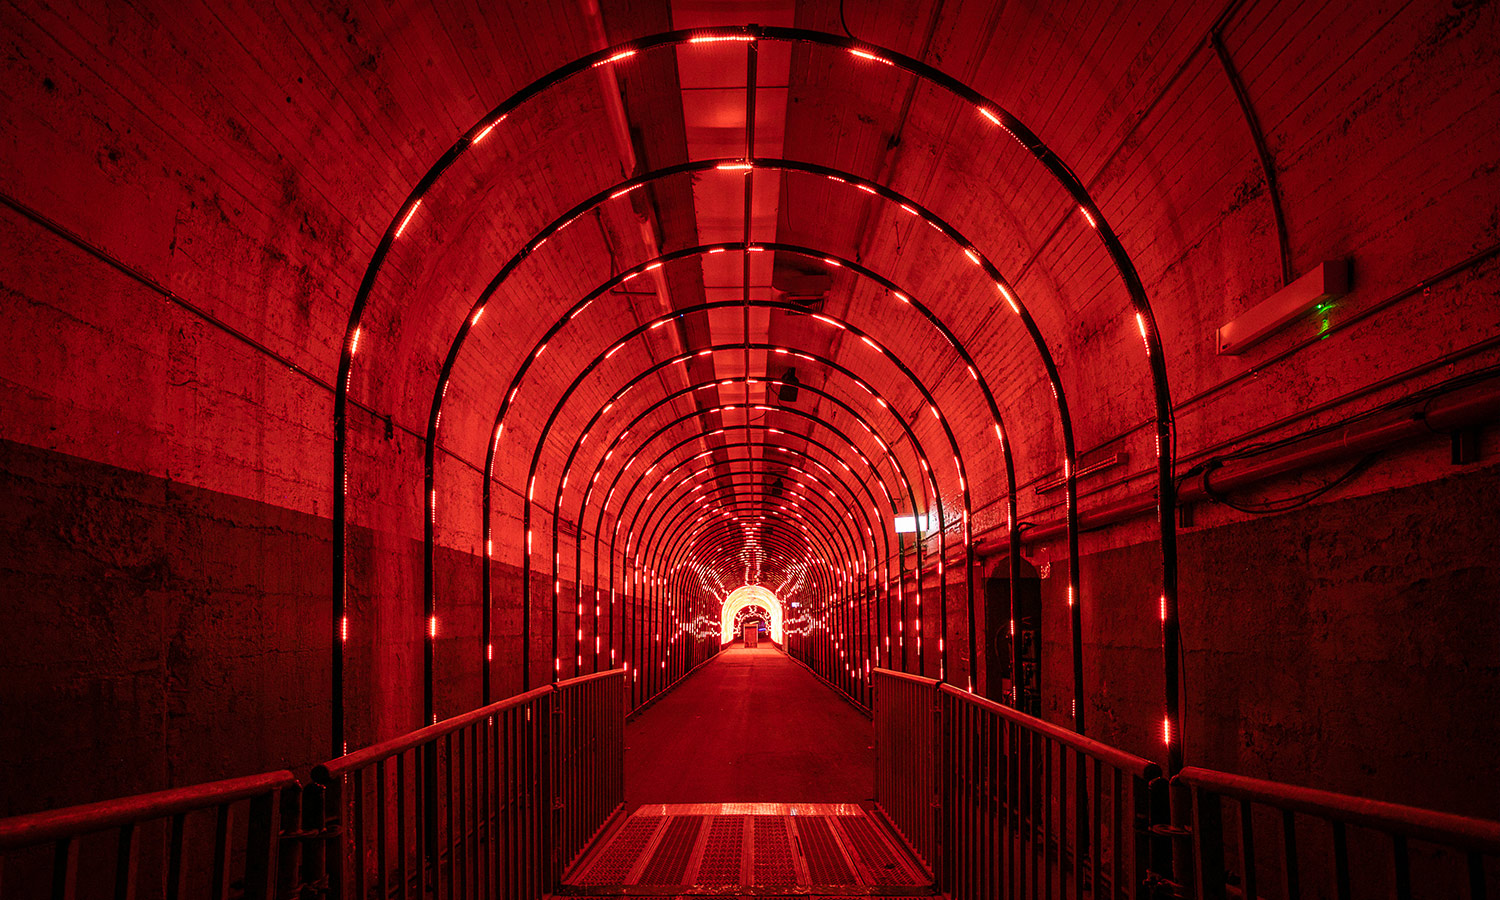 An image of the Dark Spectrum light show in the tunnels under sydney for VIVID 2023